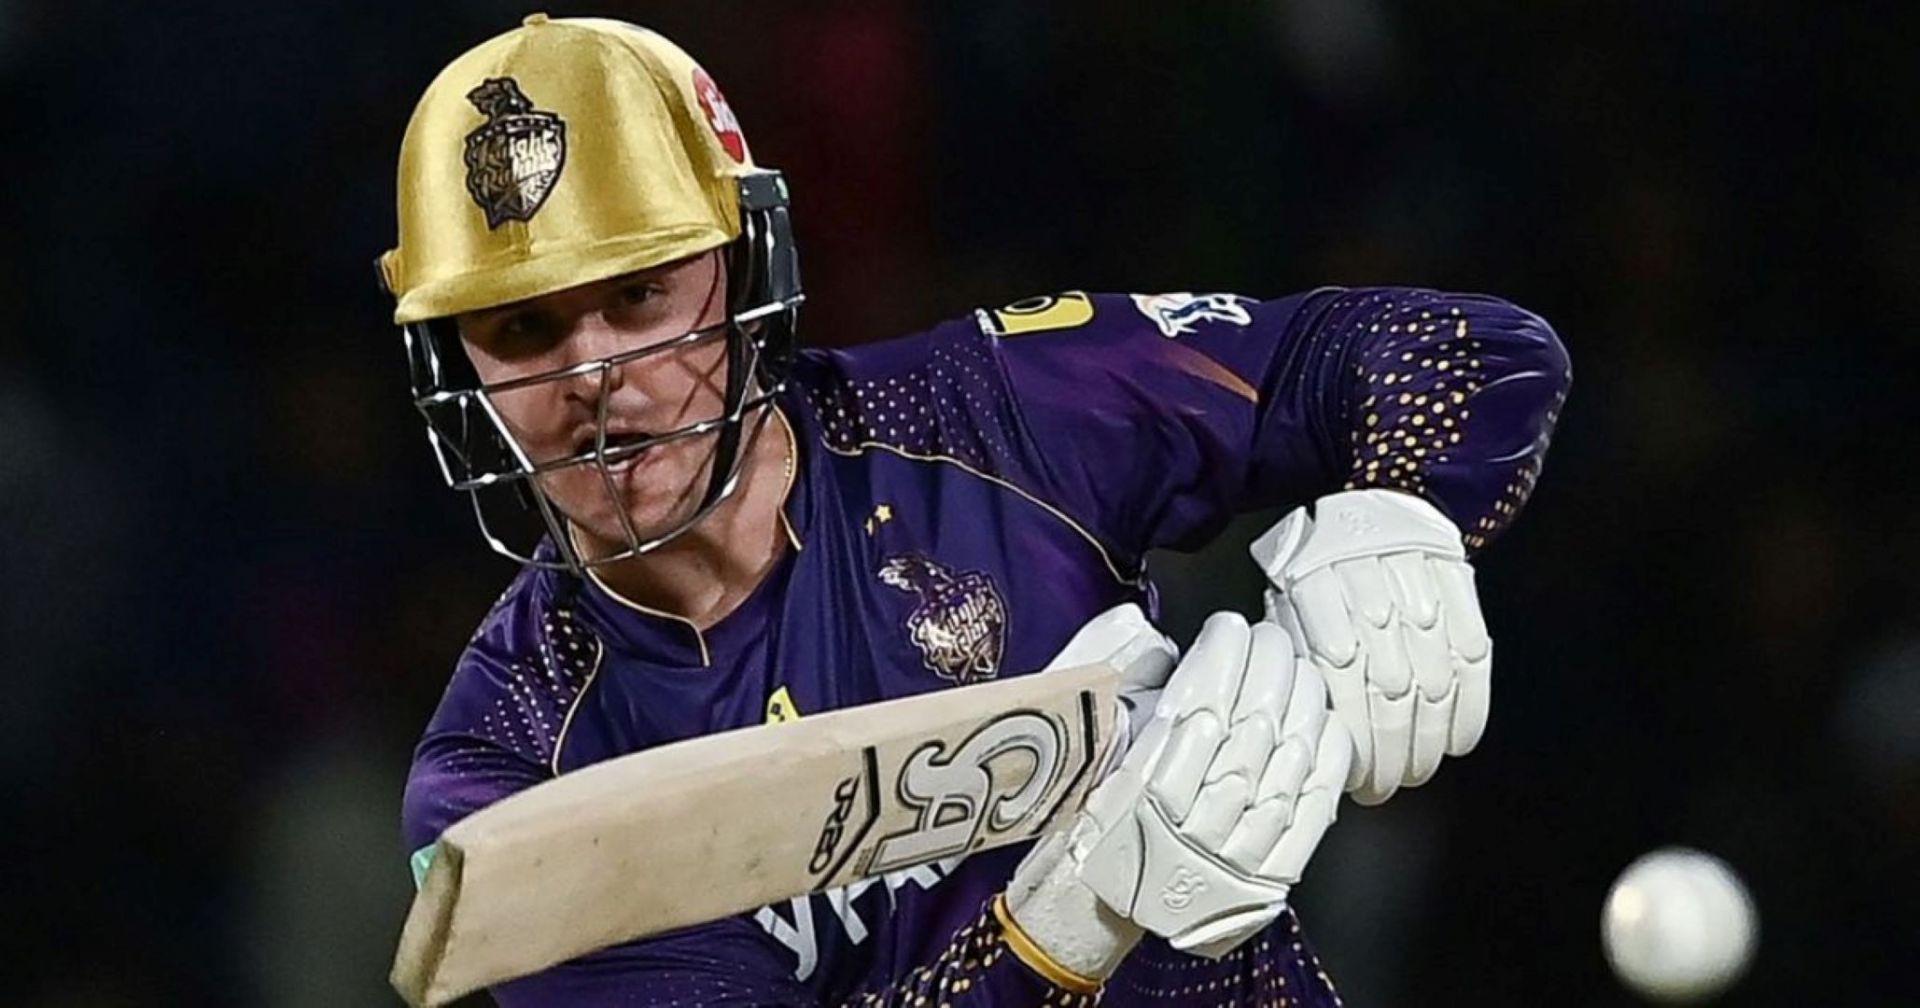 KKR will hope Jason Roy helps resolve their opening woes